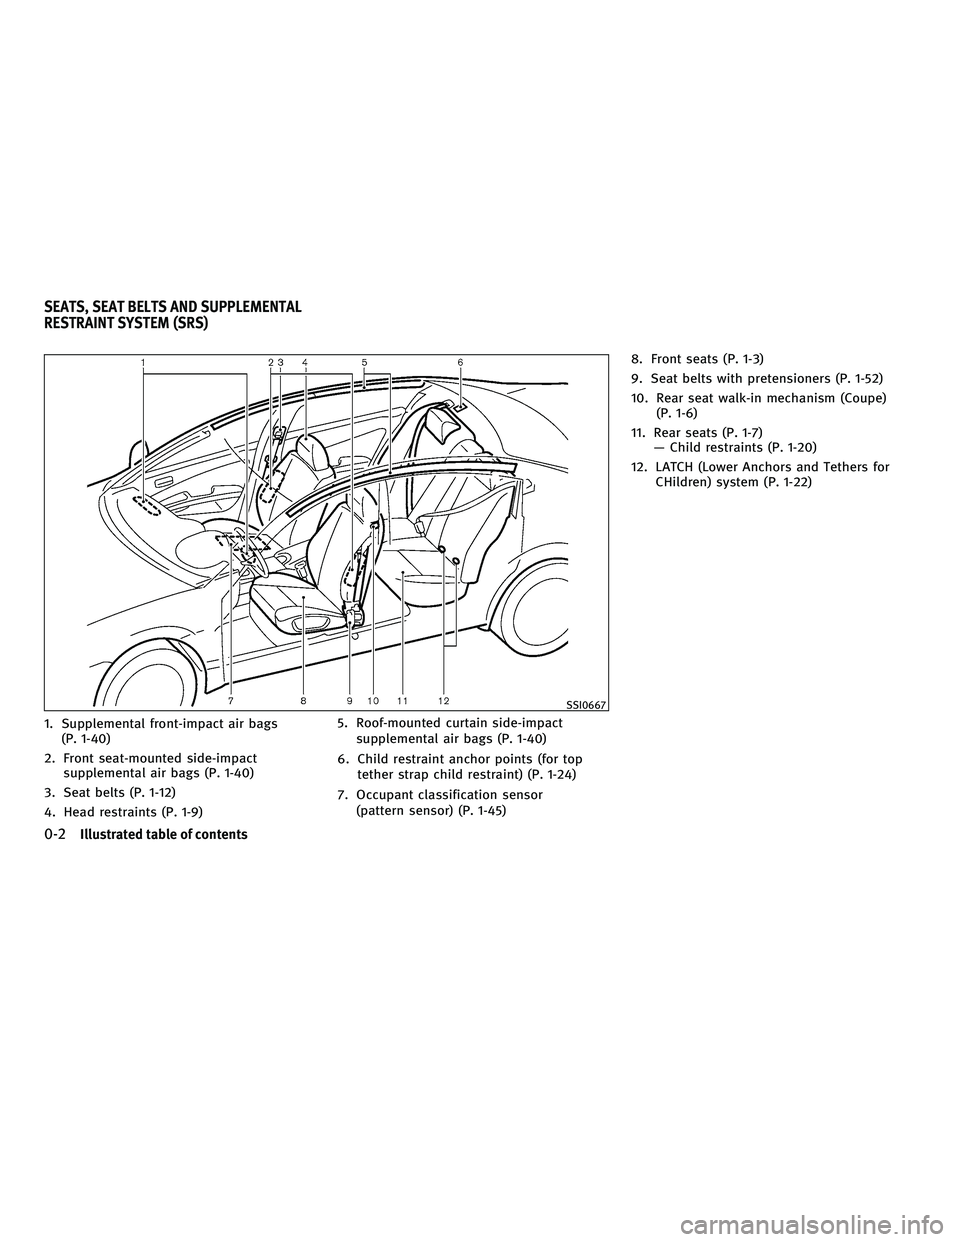 INFINITI G 2010  Owners Manual 1. Supplemental front-impact air bags(P. 1-40)
2. Front seat-mounted side-impact supplemental air bags (P. 1-40)
3. Seat belts (P. 1-12)
4. Head restraints (P. 1-9) 5. Roof-mounted curtain side-impact